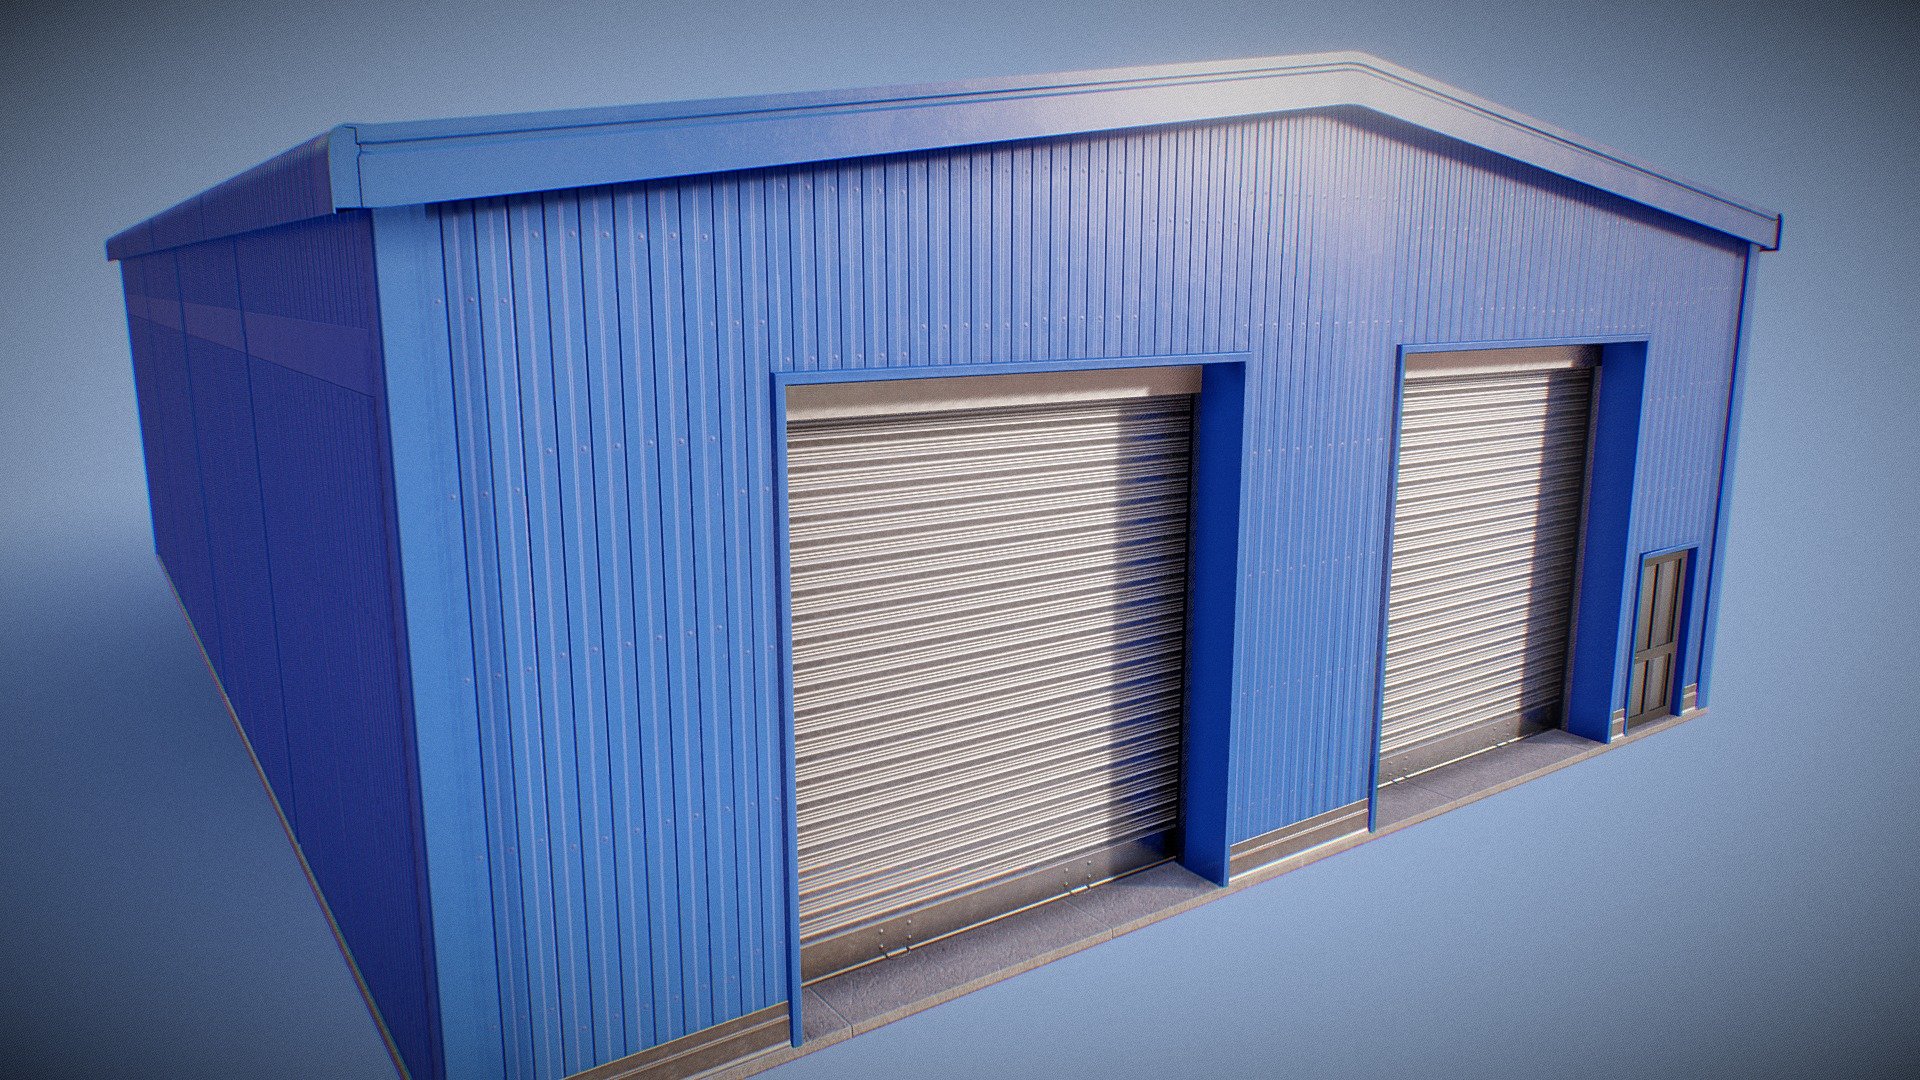 Game-Ready Large Warehouse

2048x2048 Textures (Albedo, Roughness, Metalic, Normal)



Check out other similar assets:

Large Modular Warehouse

Small Warehouse

Large Modern Warehouse

Storage Building

Hangar

Small Garage Building

Garage Building
 - Large Warehouse - Buy Royalty Free 3D model by Serhii3D 3d model